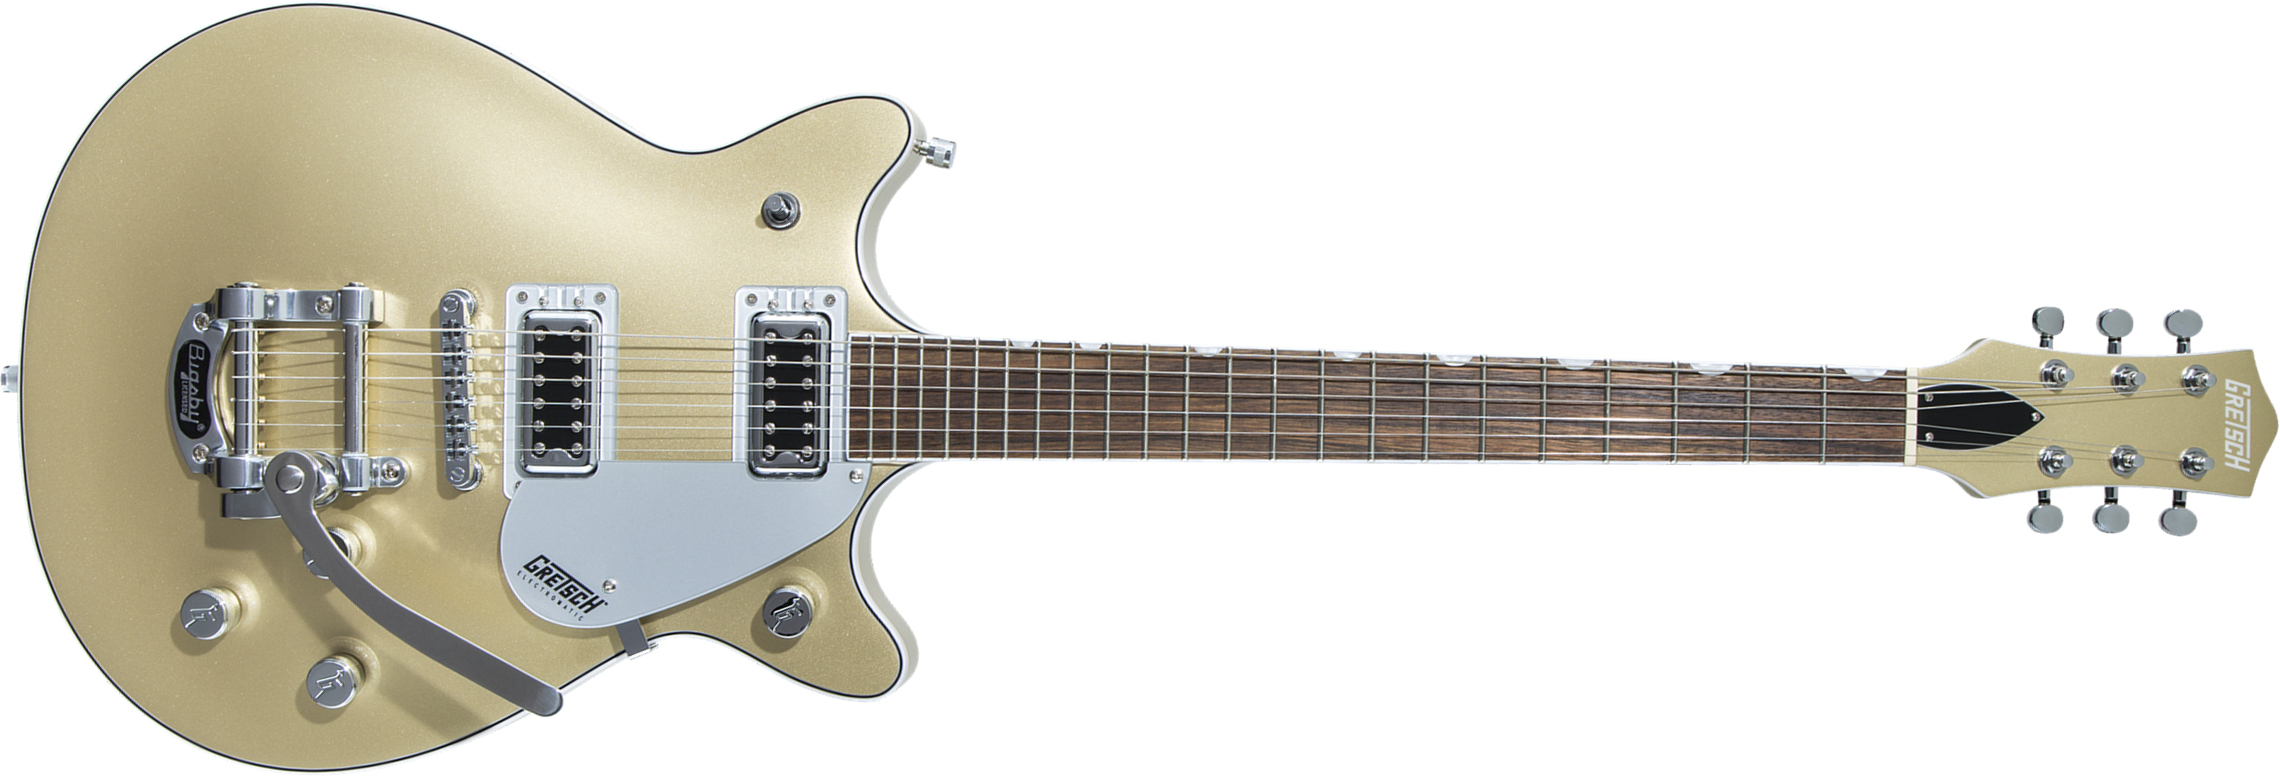 Gretsch G5232t Electromatic Double Jet Ft 2019 Hh Bigsby Lau - Casino Gold - Double cut electric guitar - Main picture